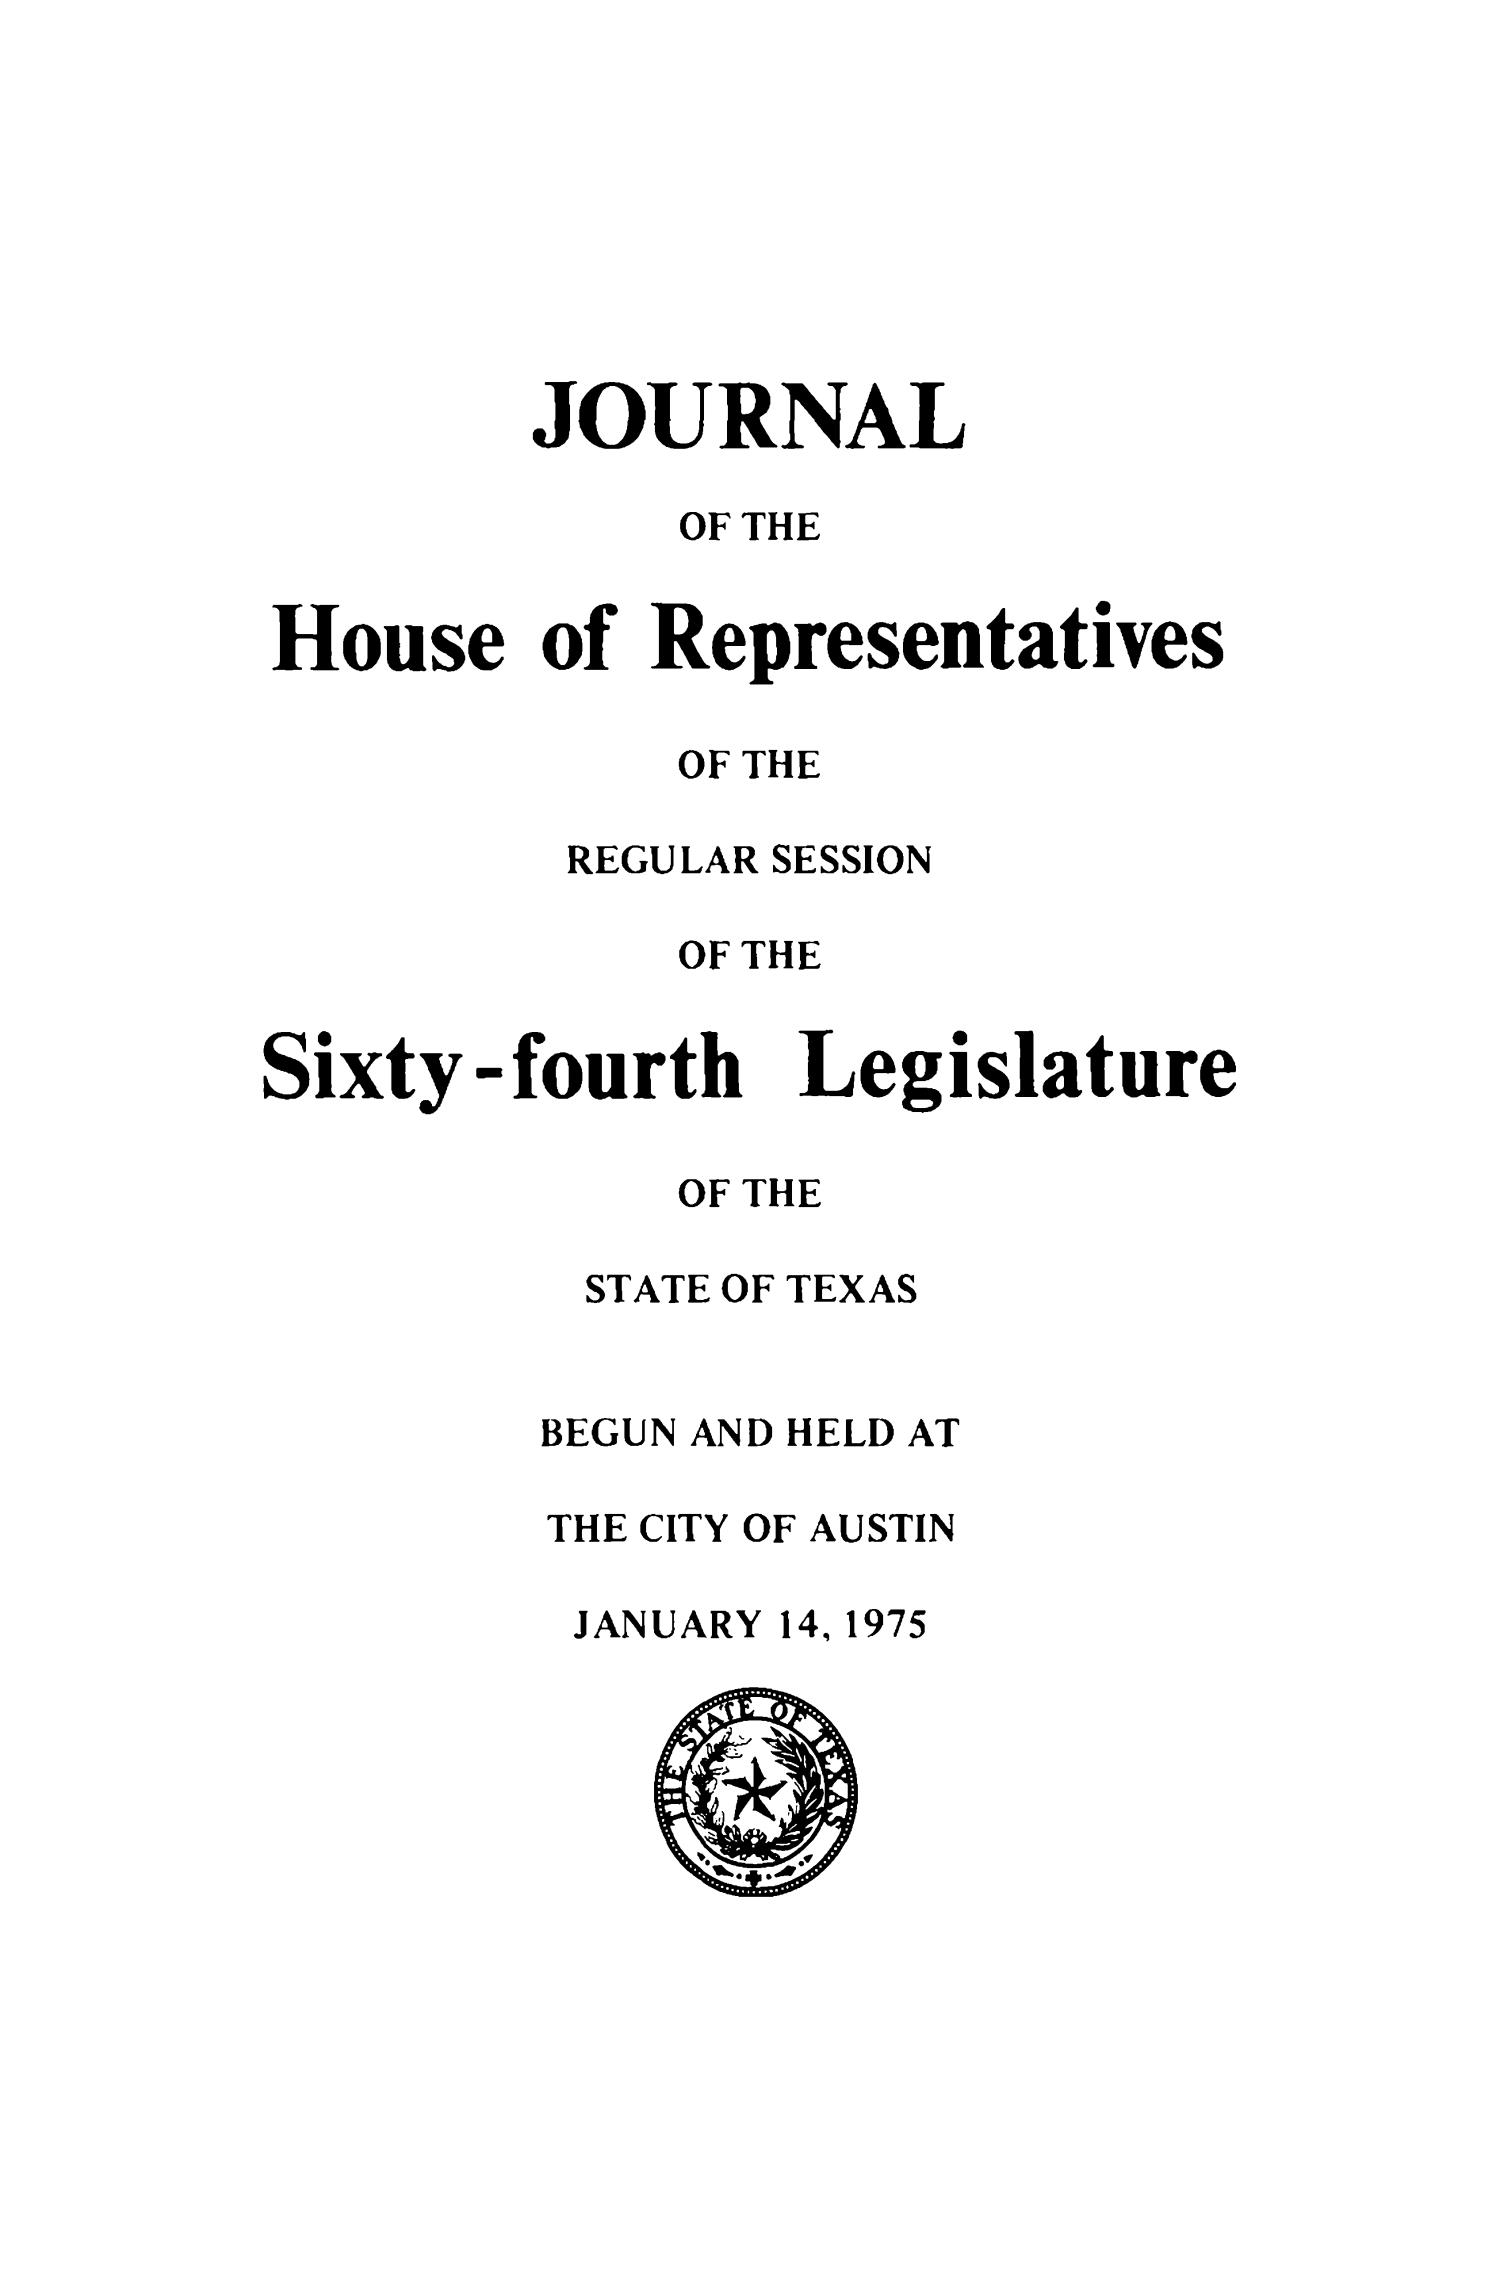 Journal of the House of Representatives of the Regular Session of the Sixty-Fourth Legislature of the State of Texas, Volume 2
                                                
                                                    Title Page
                                                